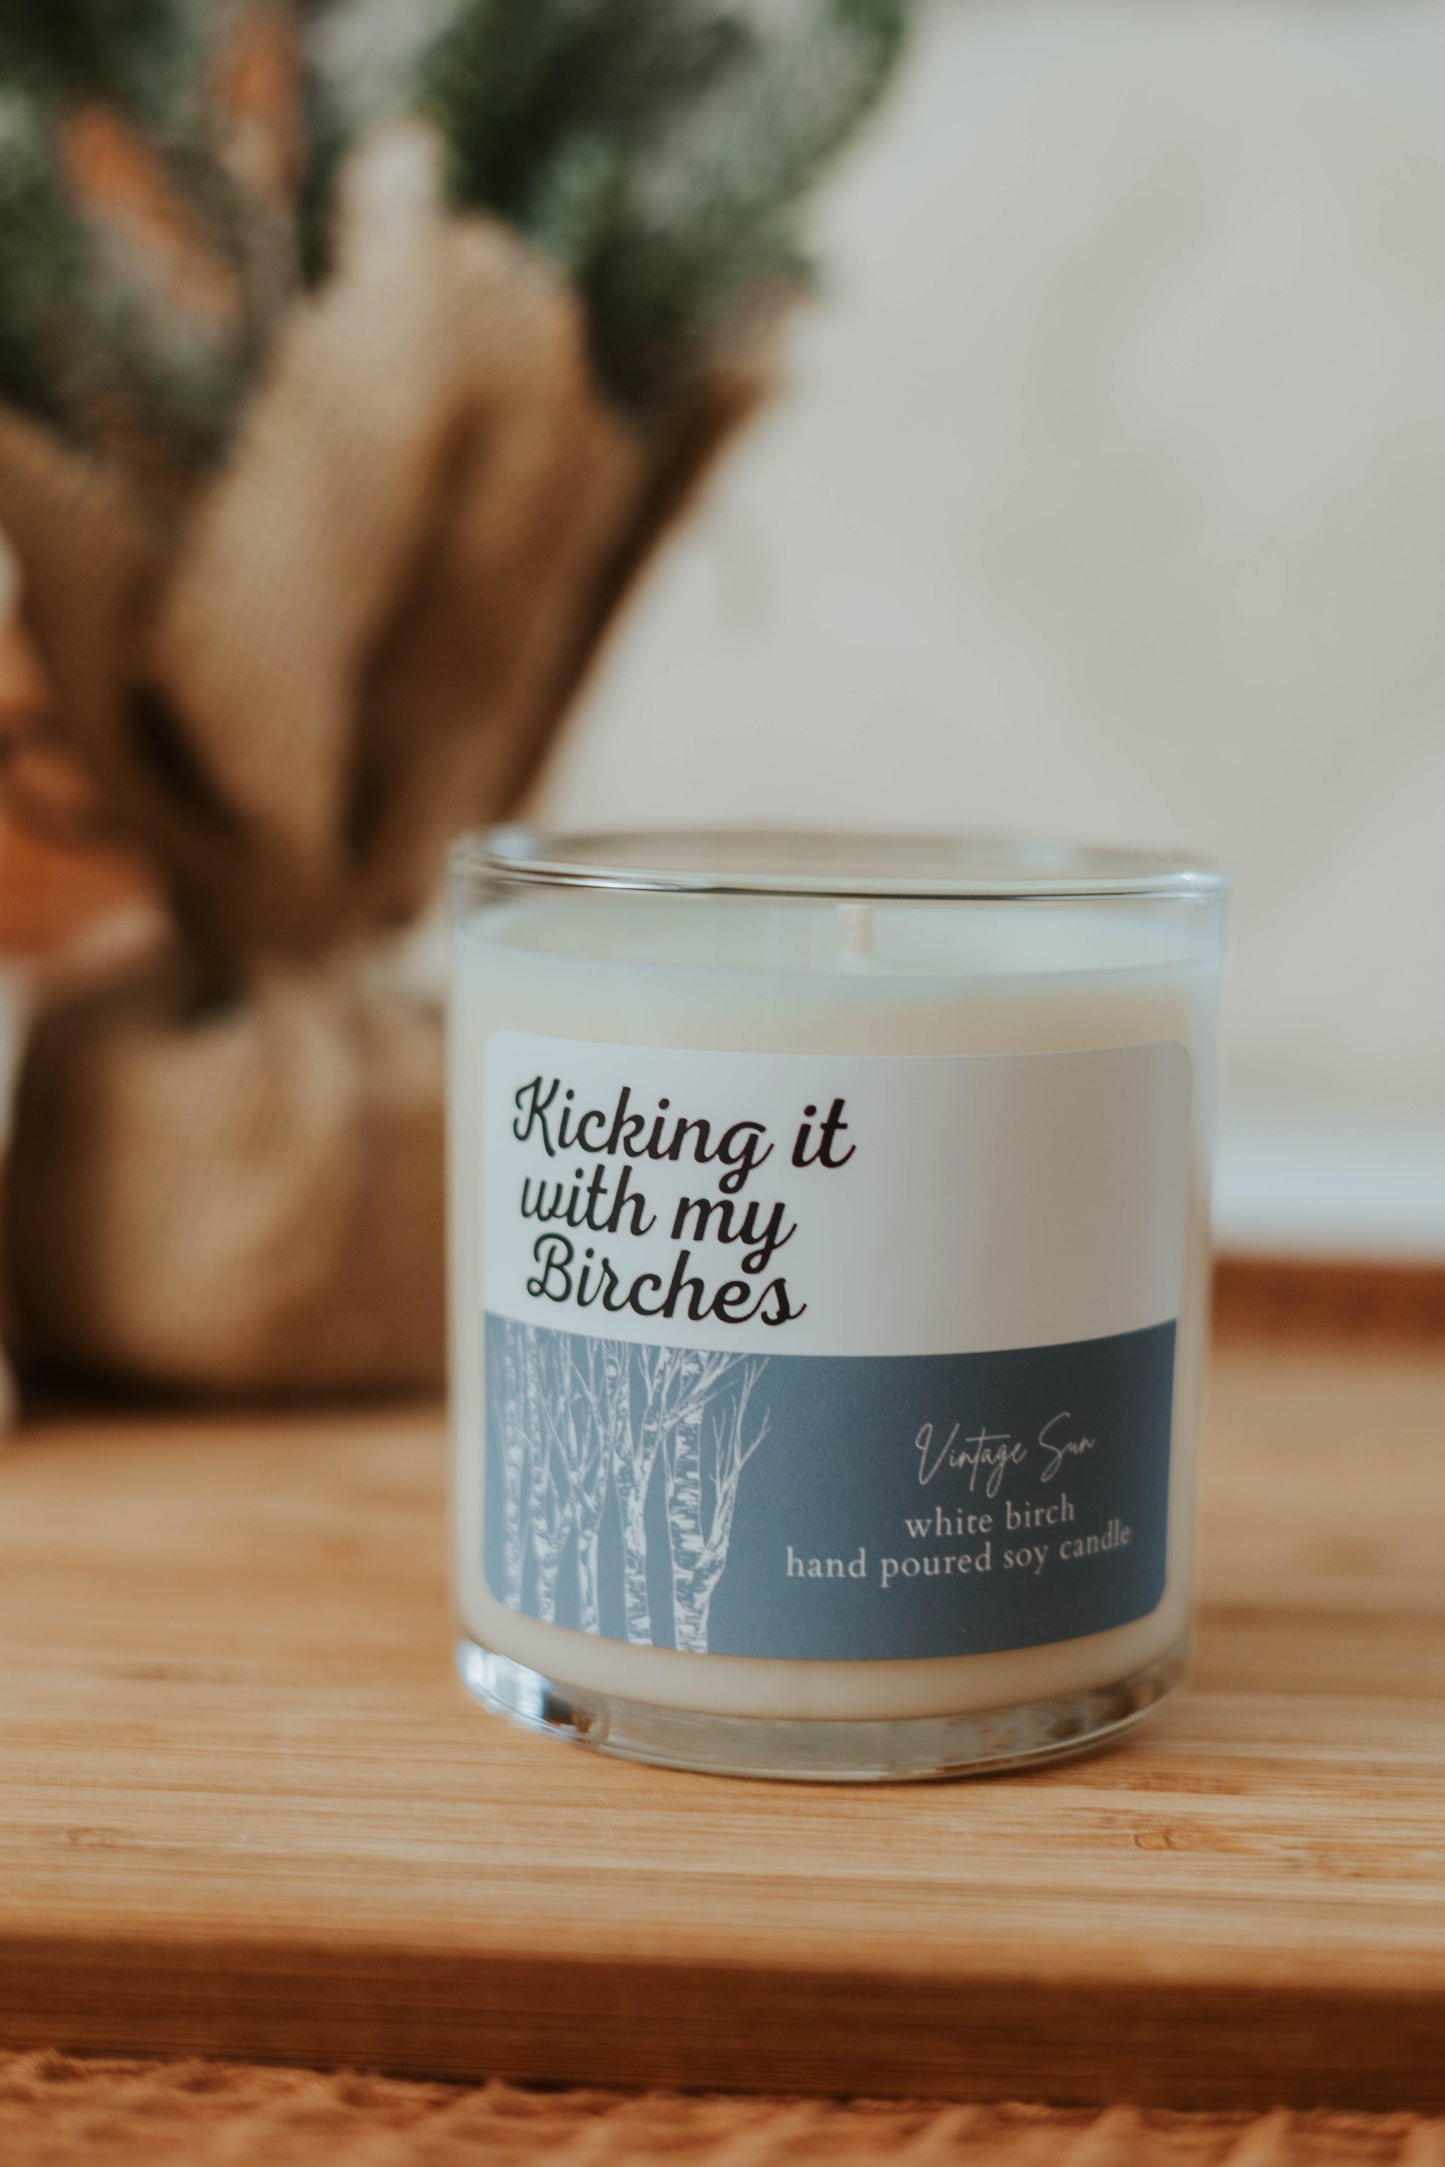 Kicking it with my Birches - Soy Wax Candle